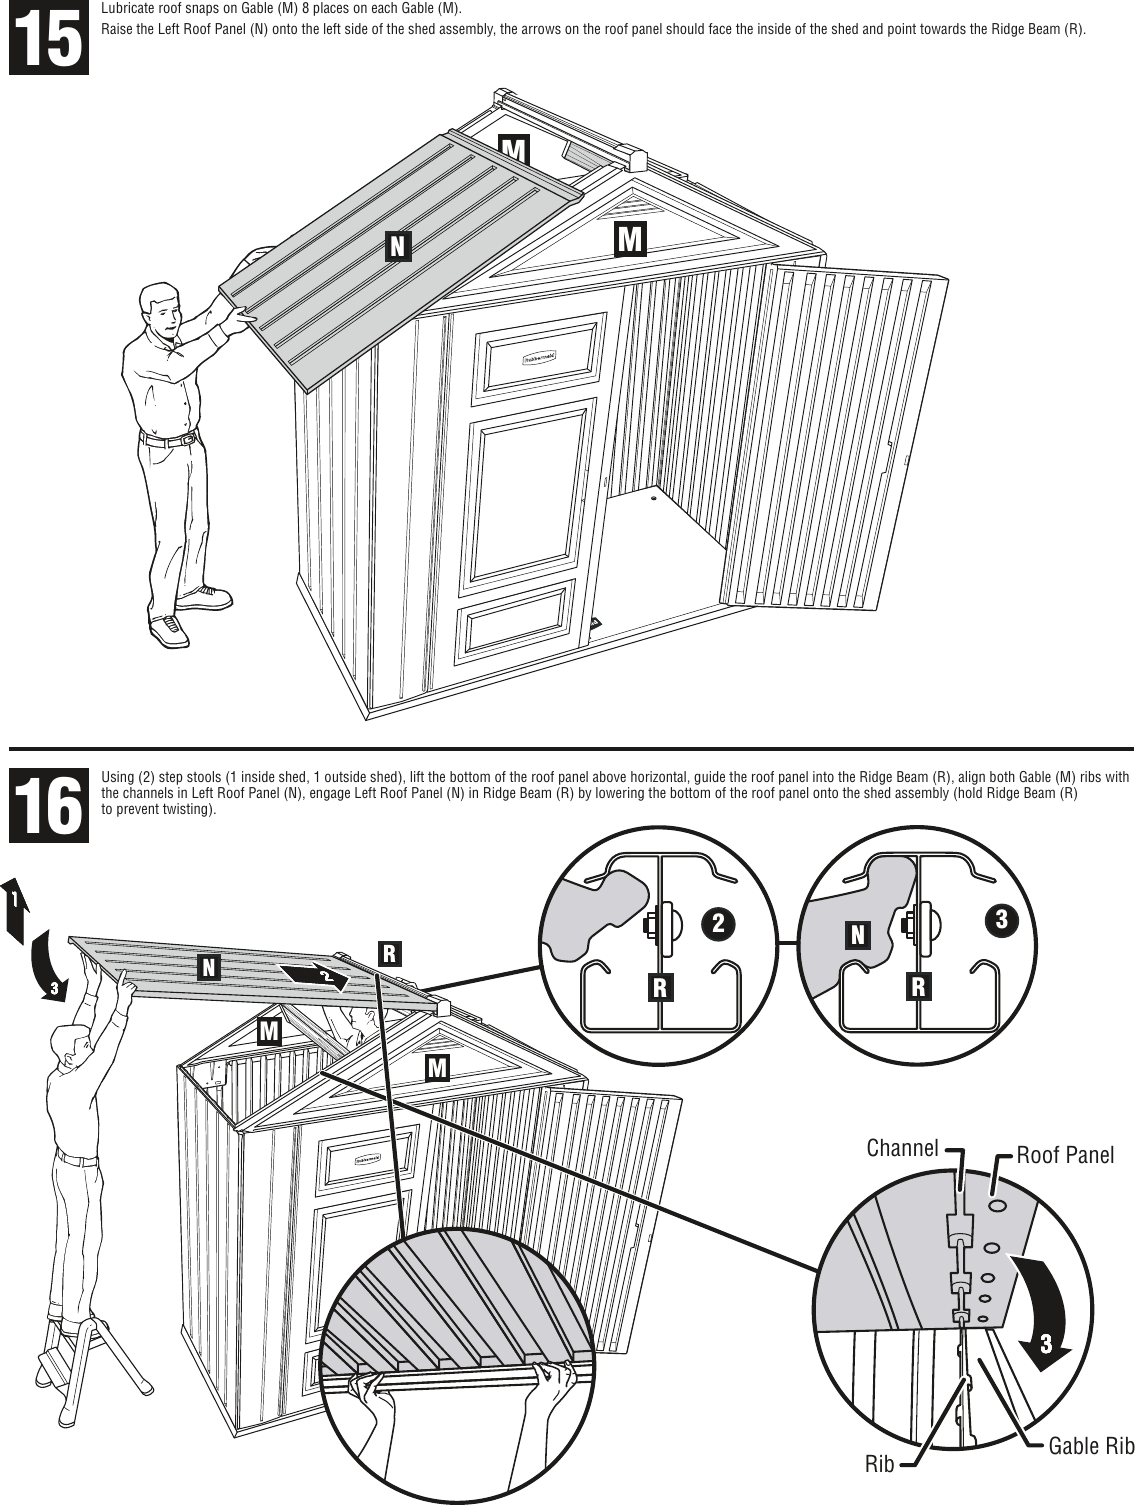 Page 6 of 9 - Rubbermaid Rubbermaid-Outdoor-Storage-1S85-Users-Manual- Big Max Jr Assembly Instruction Manual English  Rubbermaid-outdoor-storage-1s85-users-manual